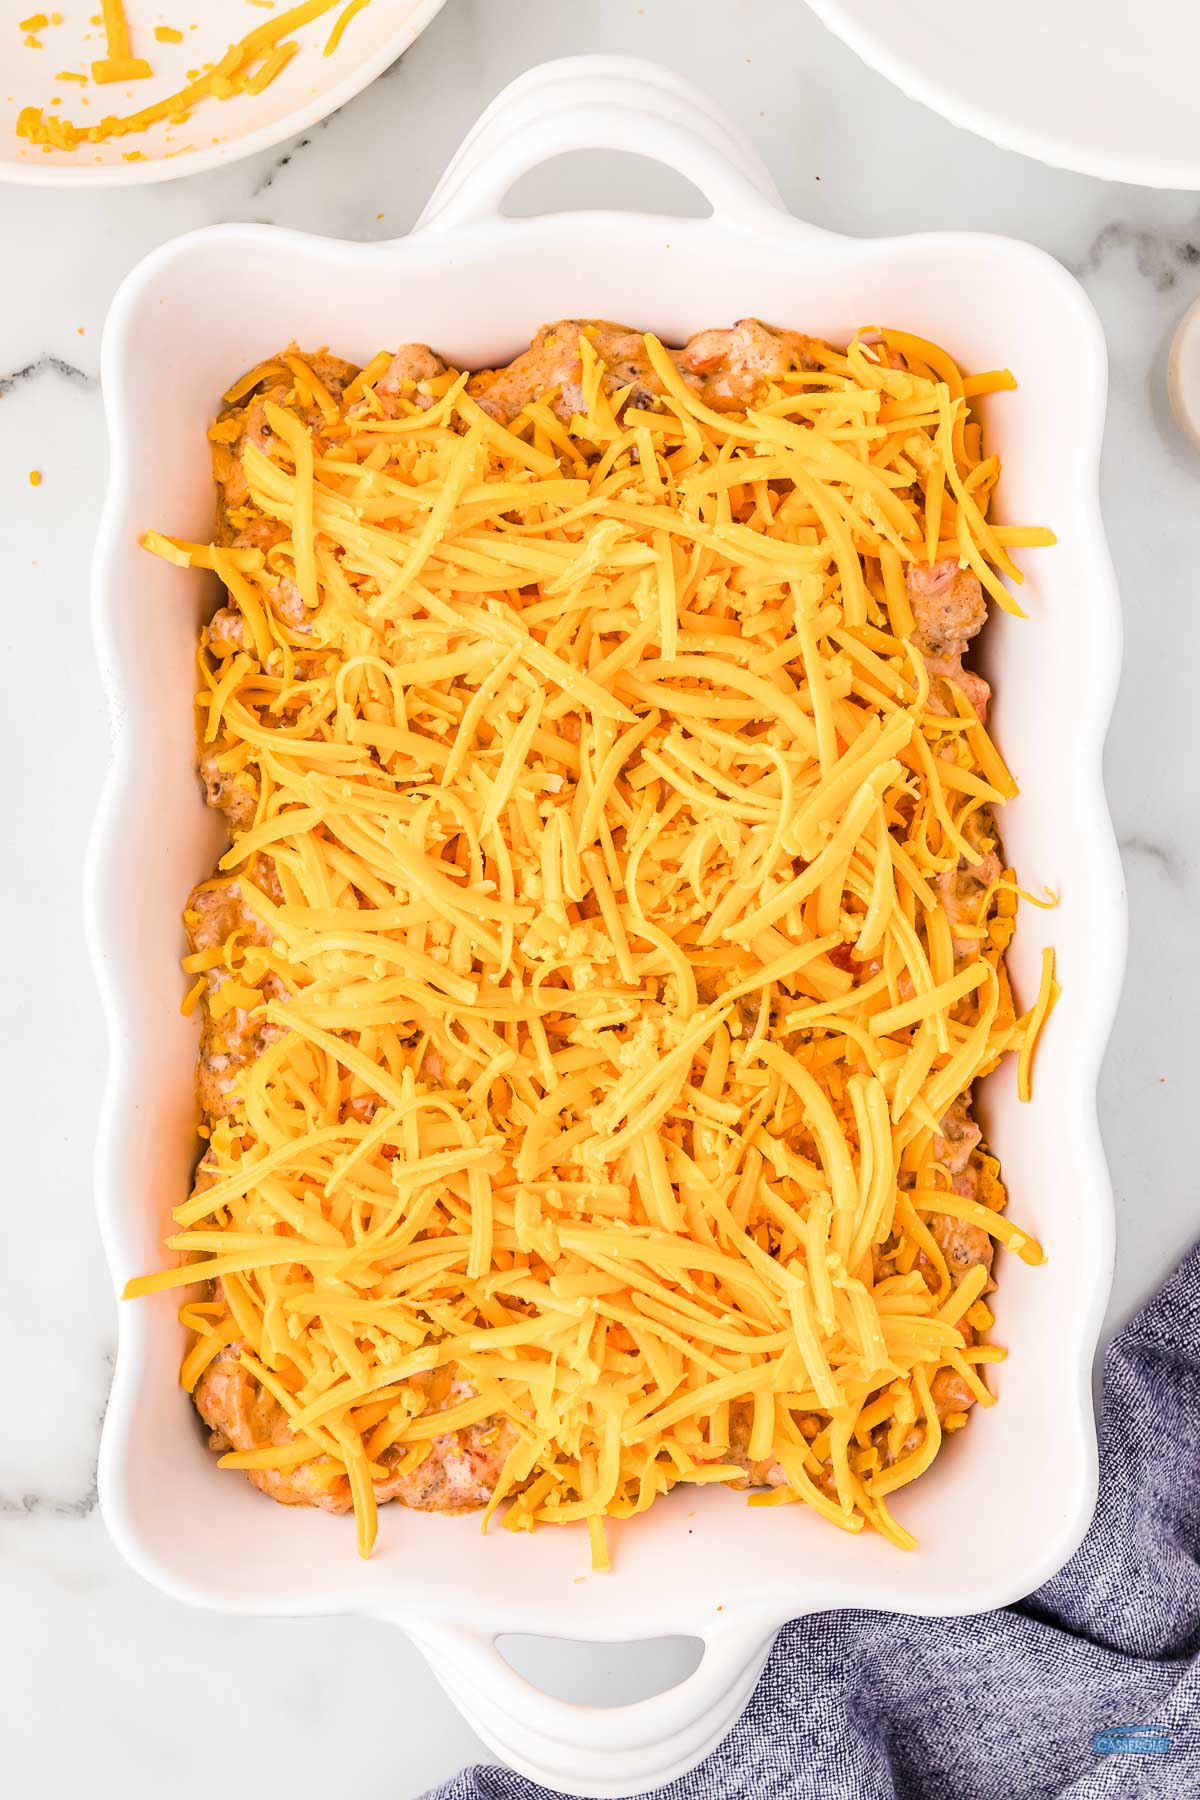 shredded cheese on top of casserole in a white rectangle dish